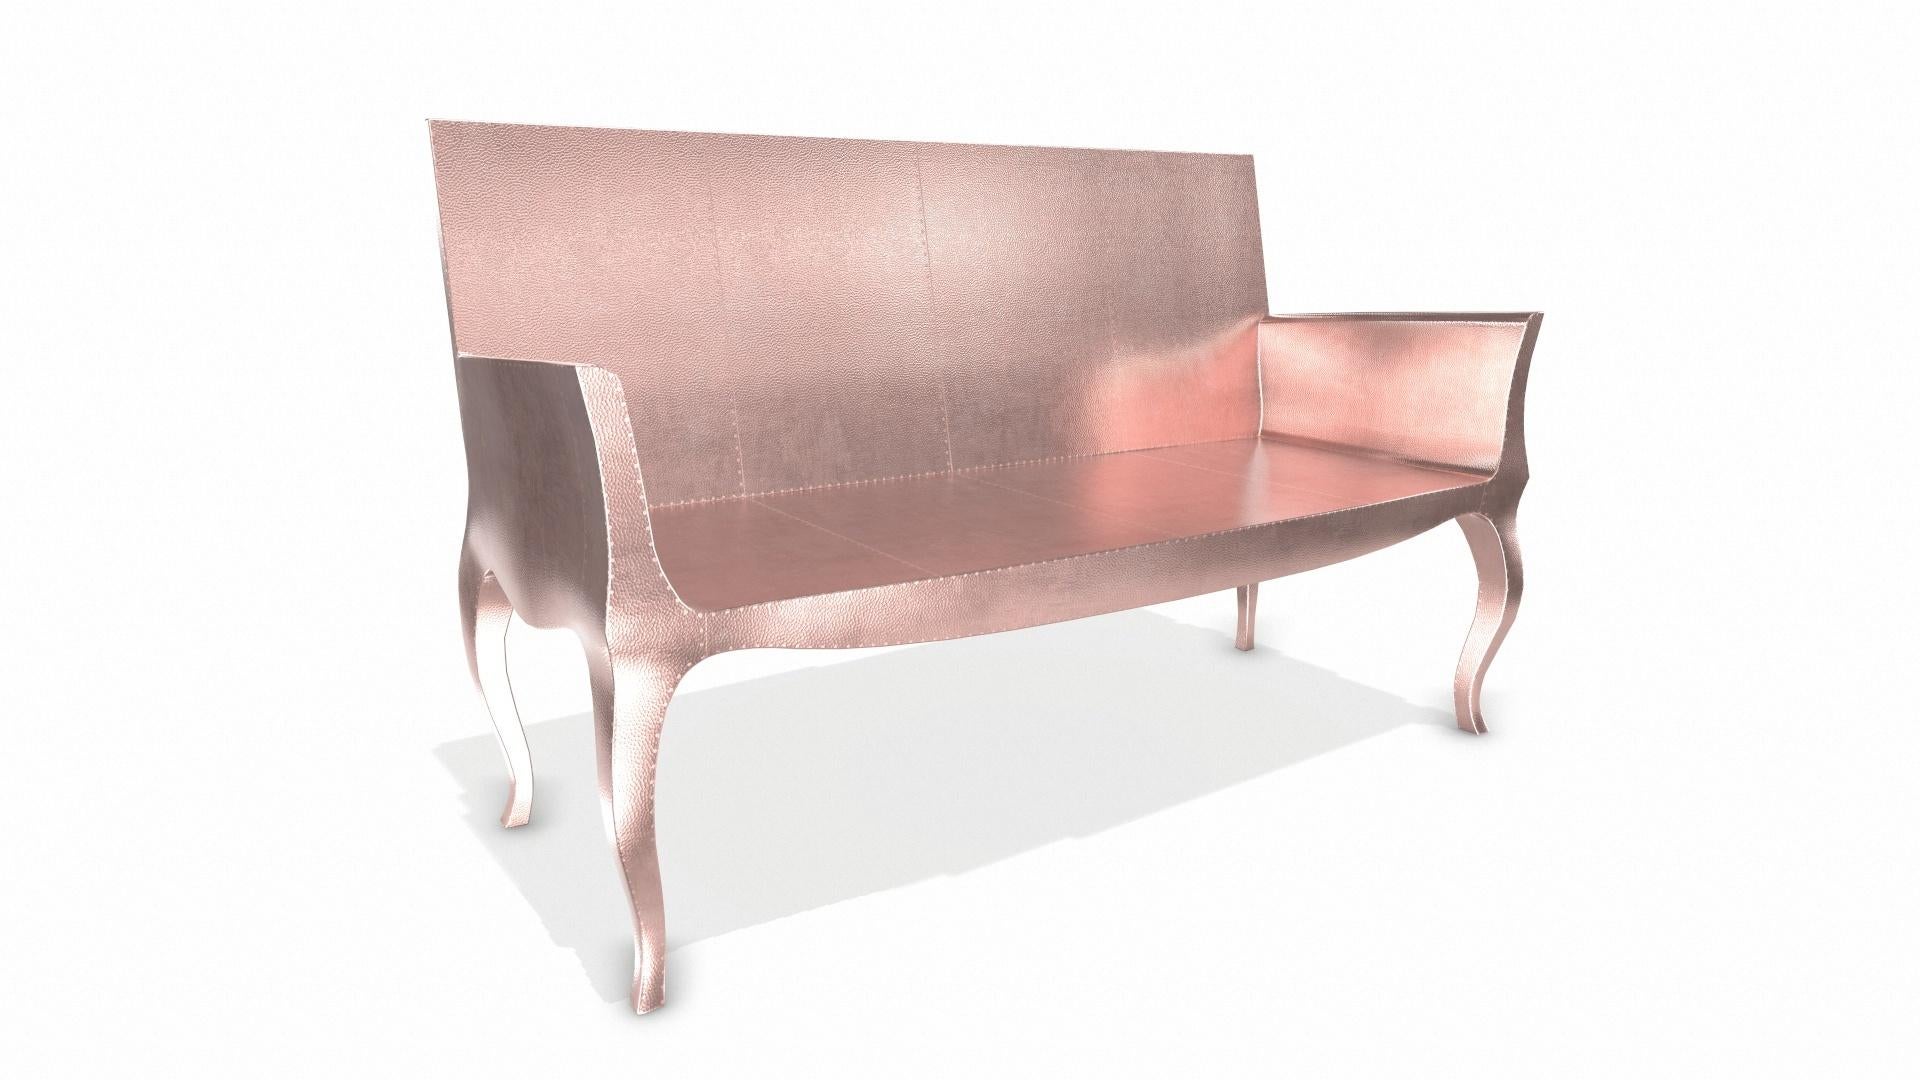 Contemporary Louise Settee Art Deco Chaise Longues  in Mid. Hammered Copper by Paul Mathieu For Sale